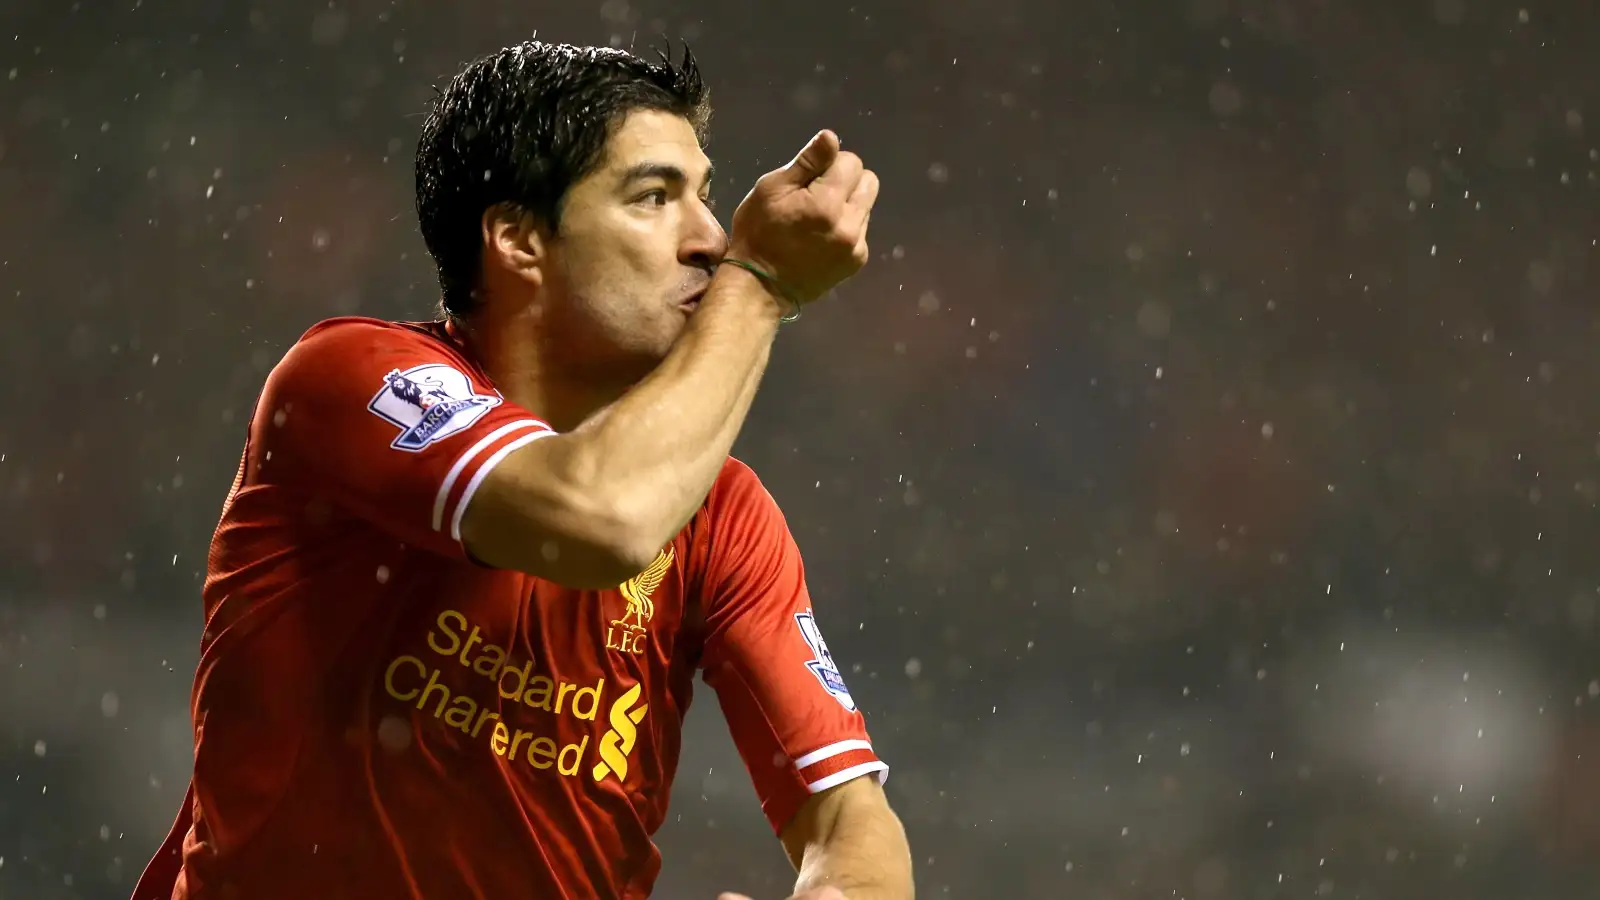 The 5 players Liverpool sold along with Luis Suarez and how they fared